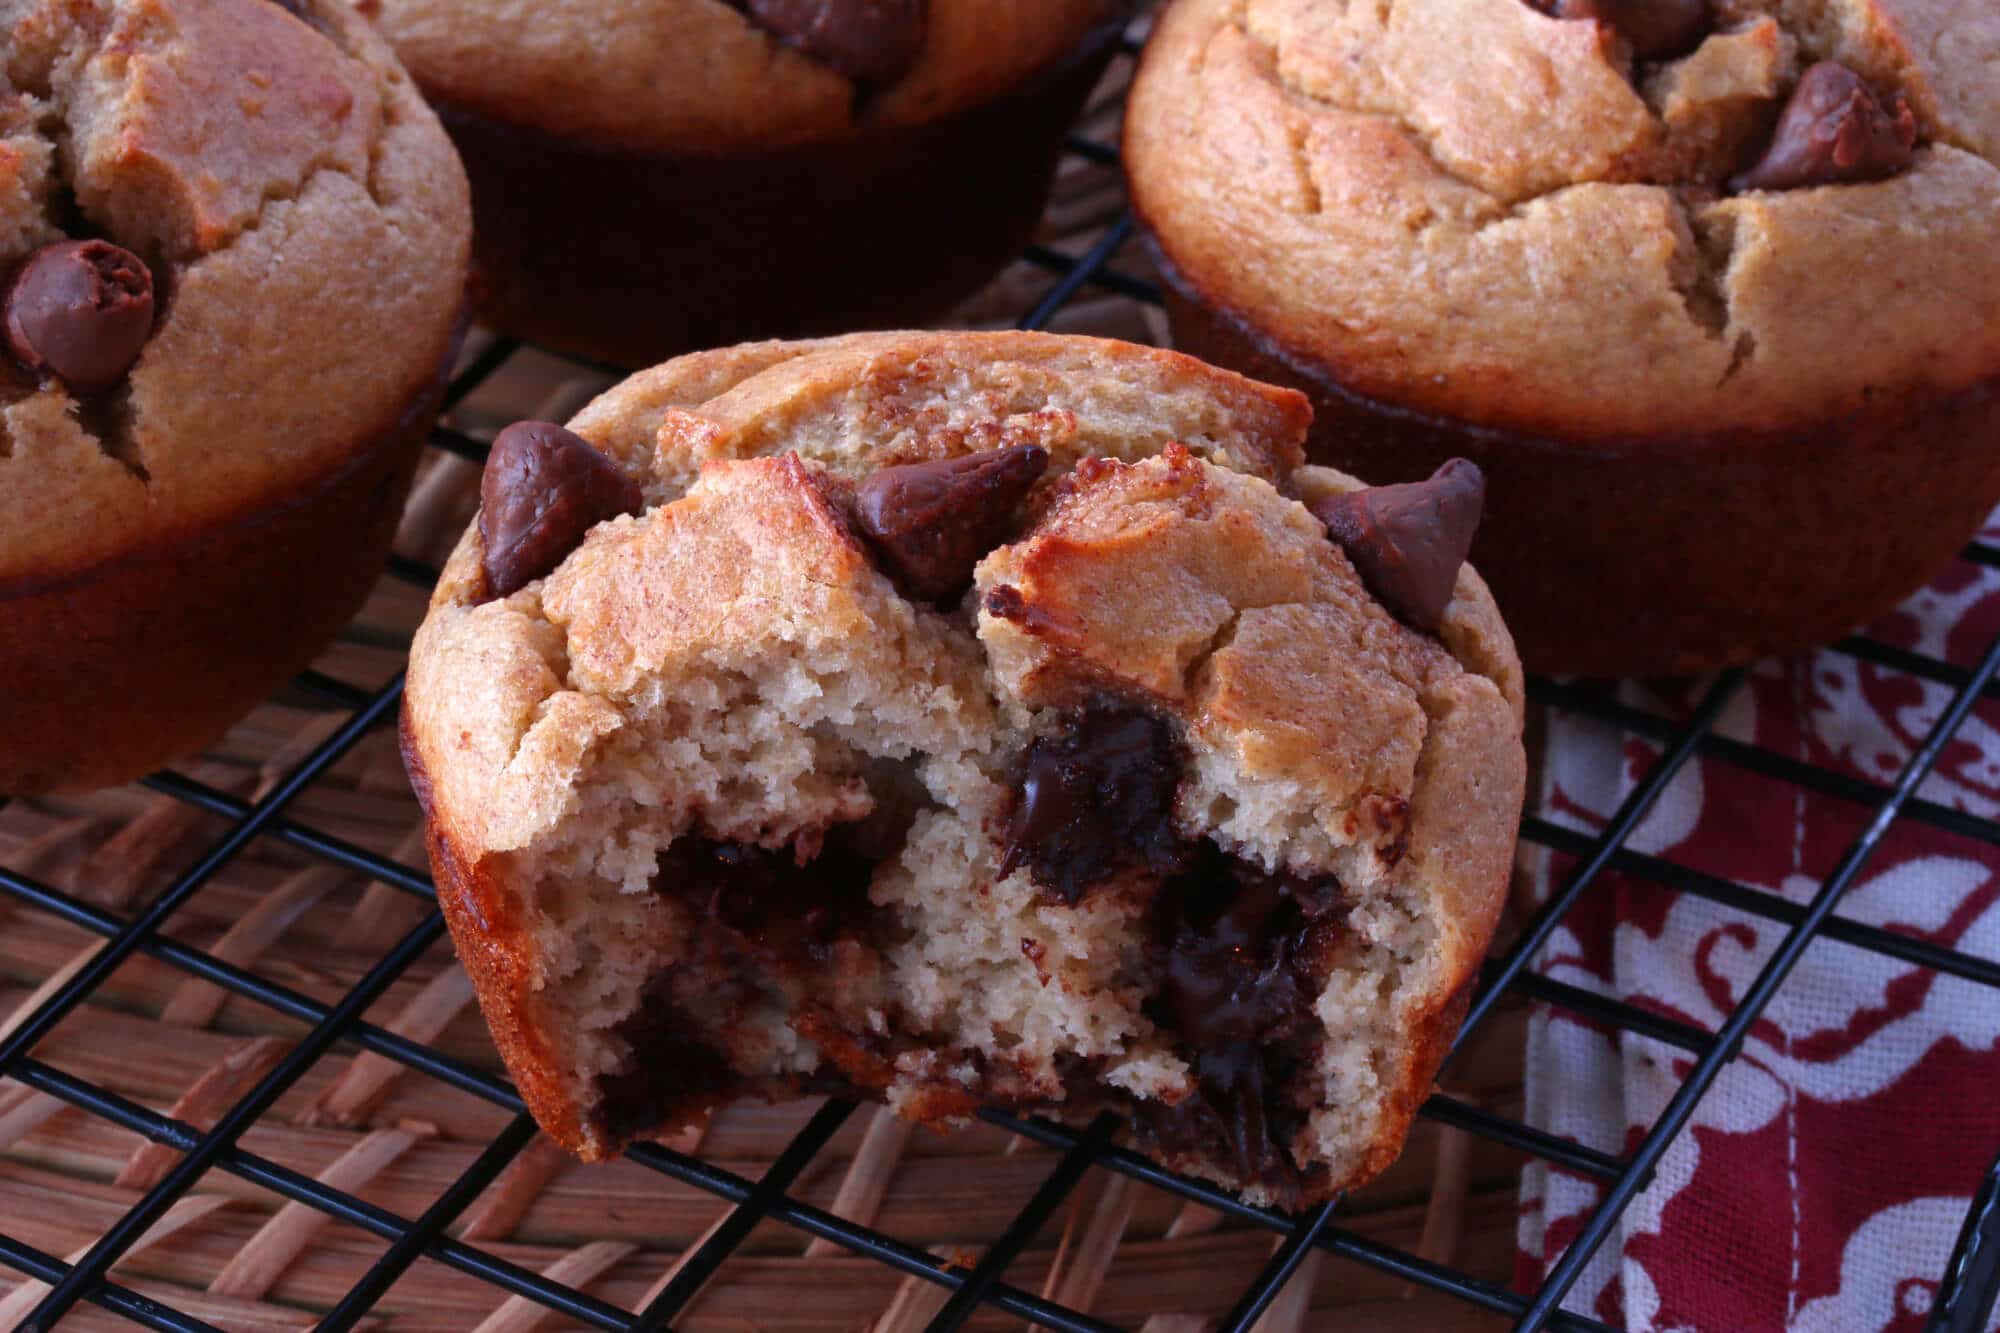 blender muffins recipe easy healthy without flour sugar oil gluten free chocolate chips banana